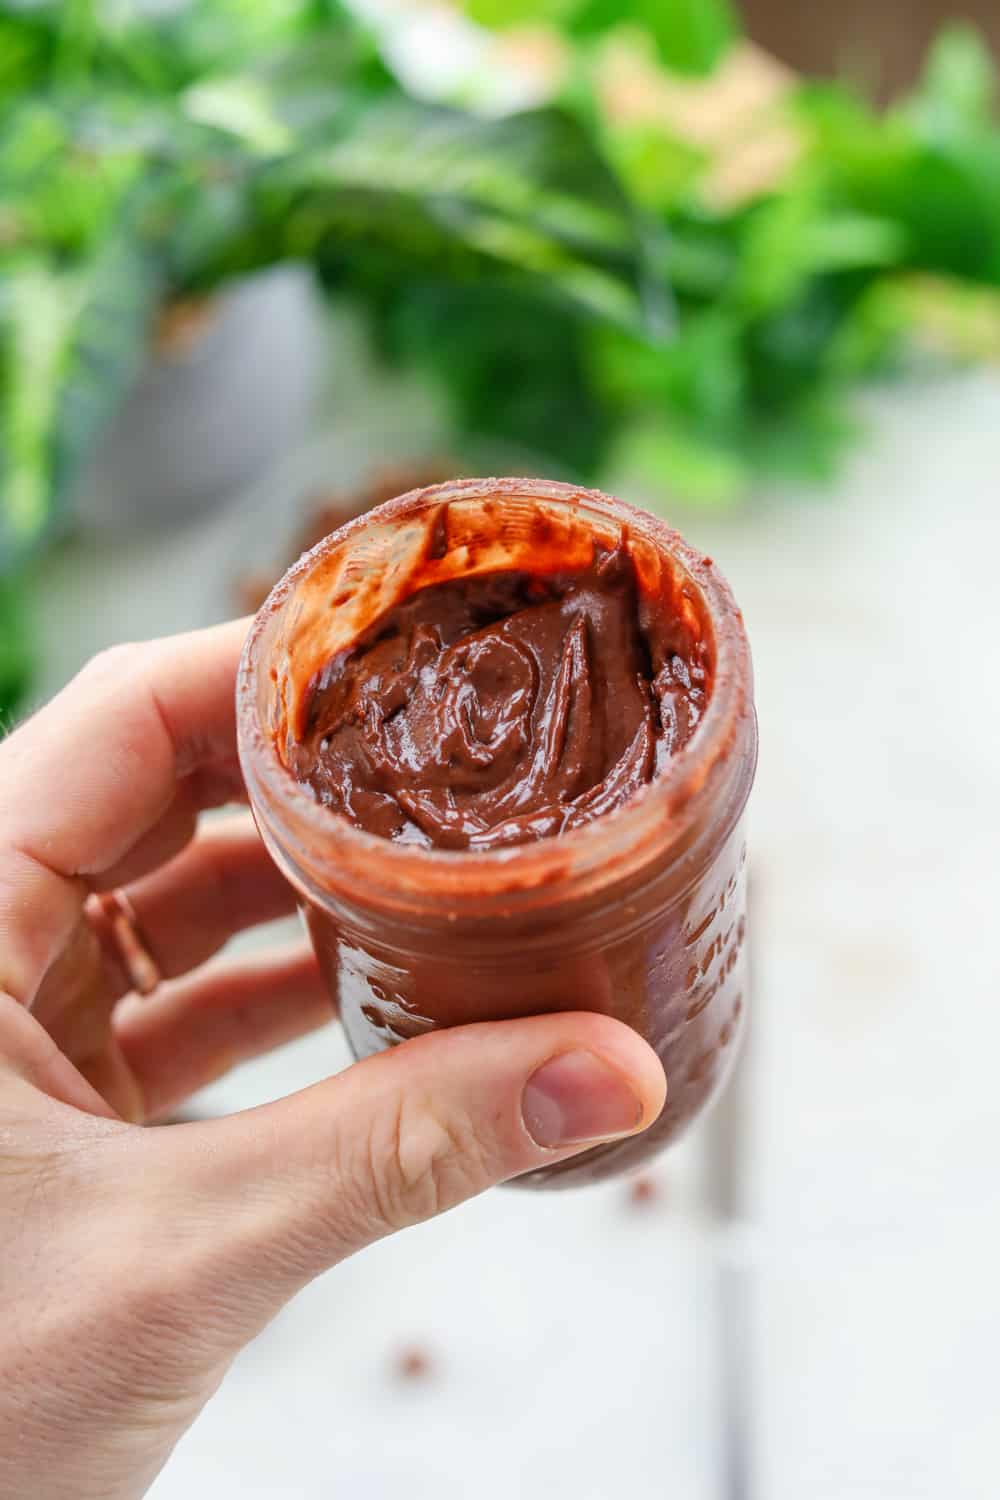 Keto Nutella Made With 5 Ingredients